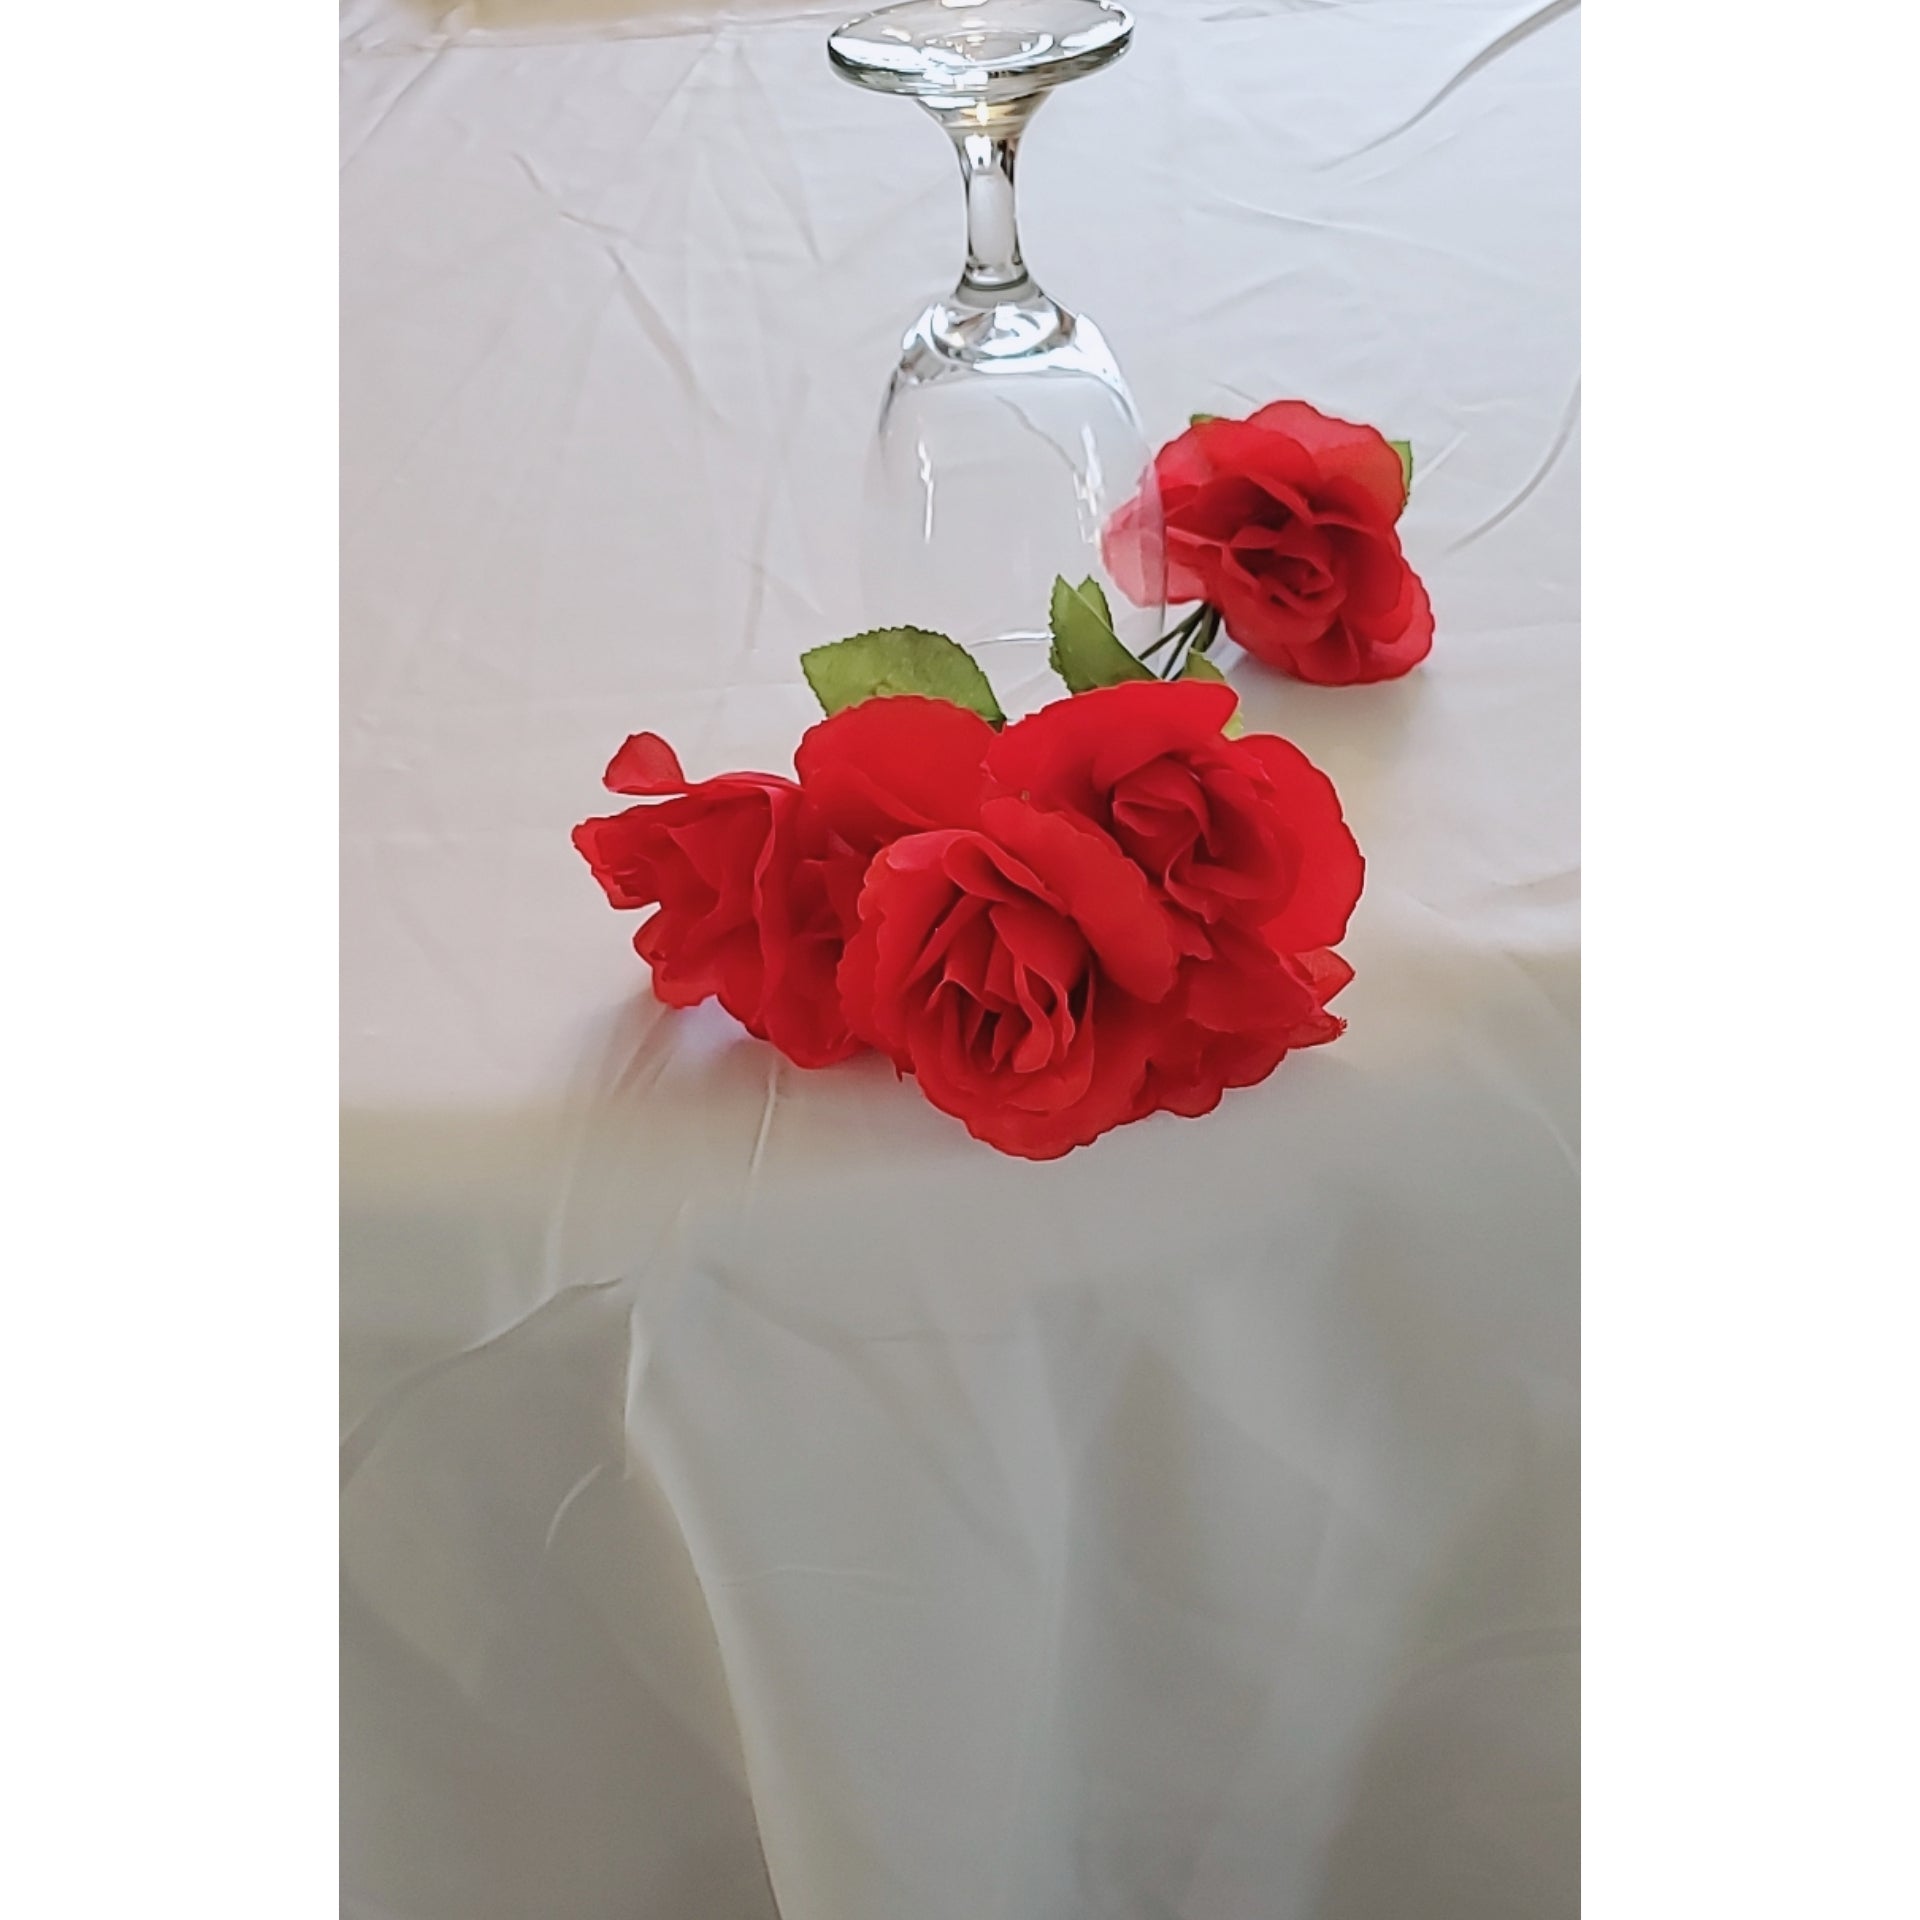 White Round Polyester Tablecloths